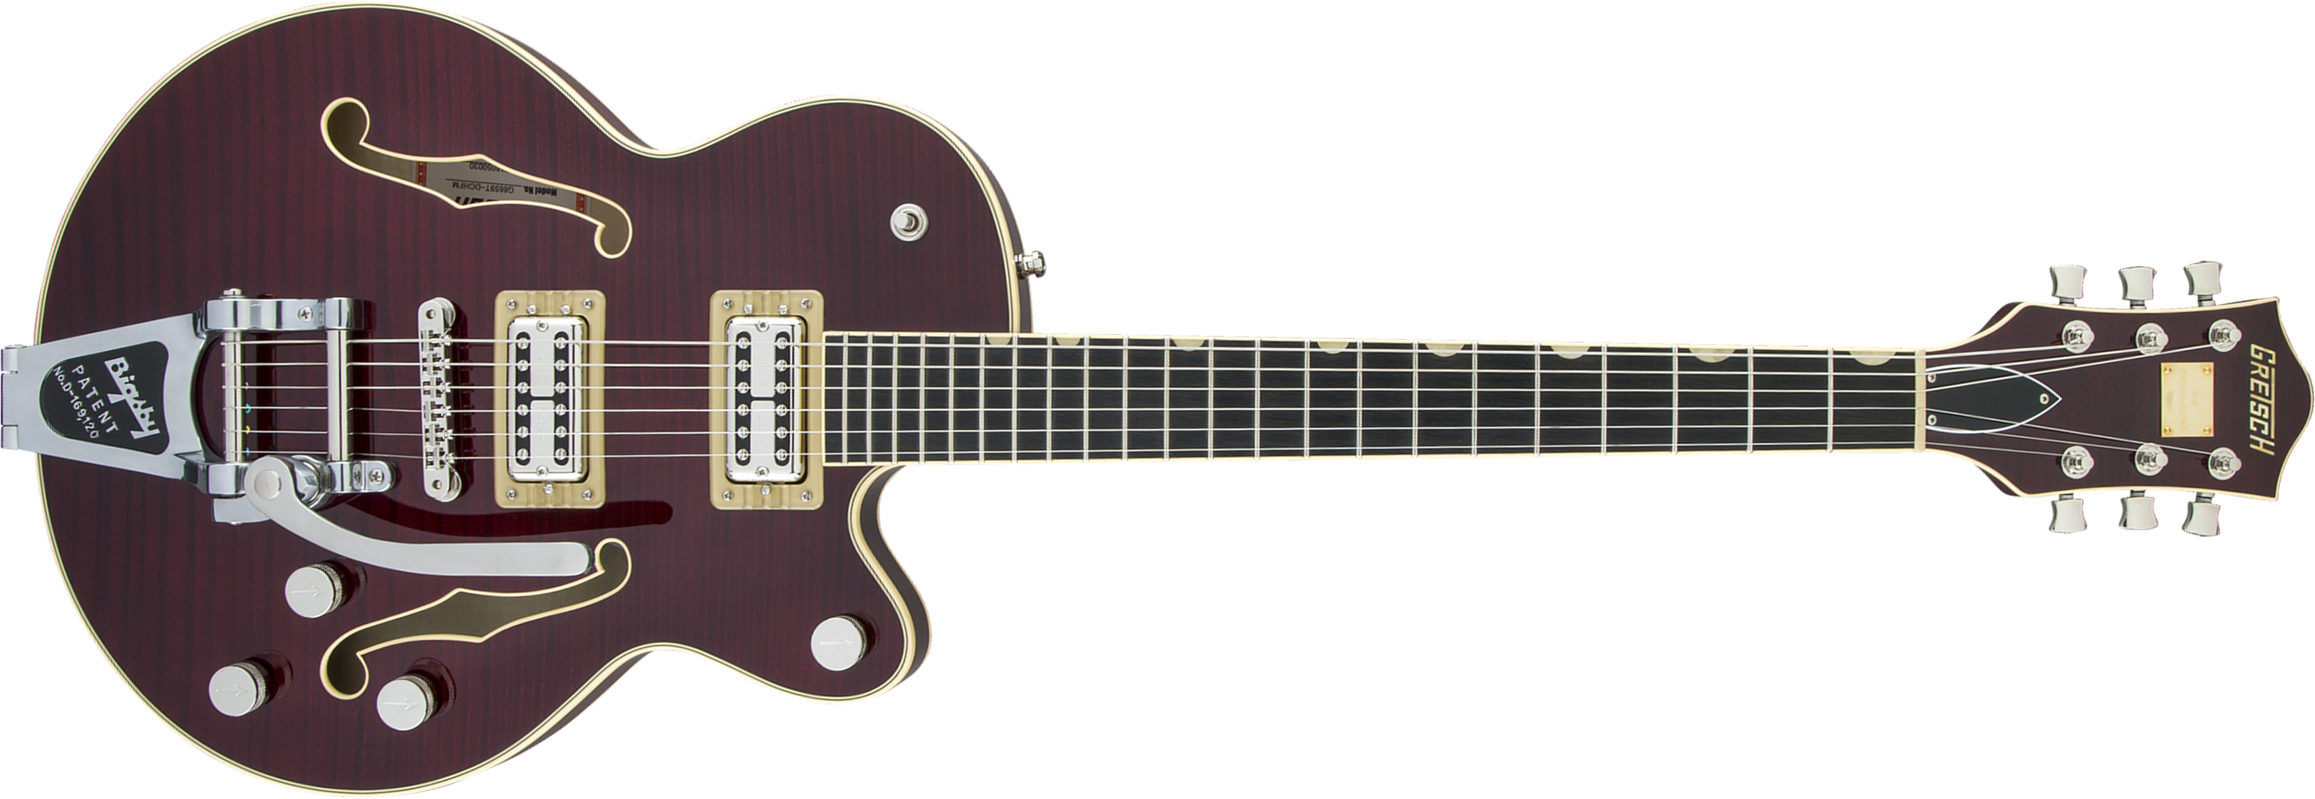 Gretsch G6659tfm Broadkaster Jr Center Bloc Players Edition Pro Jap Bigsby Eb - Dark Cherry Stain - Guitarra eléctrica semi caja - Main picture